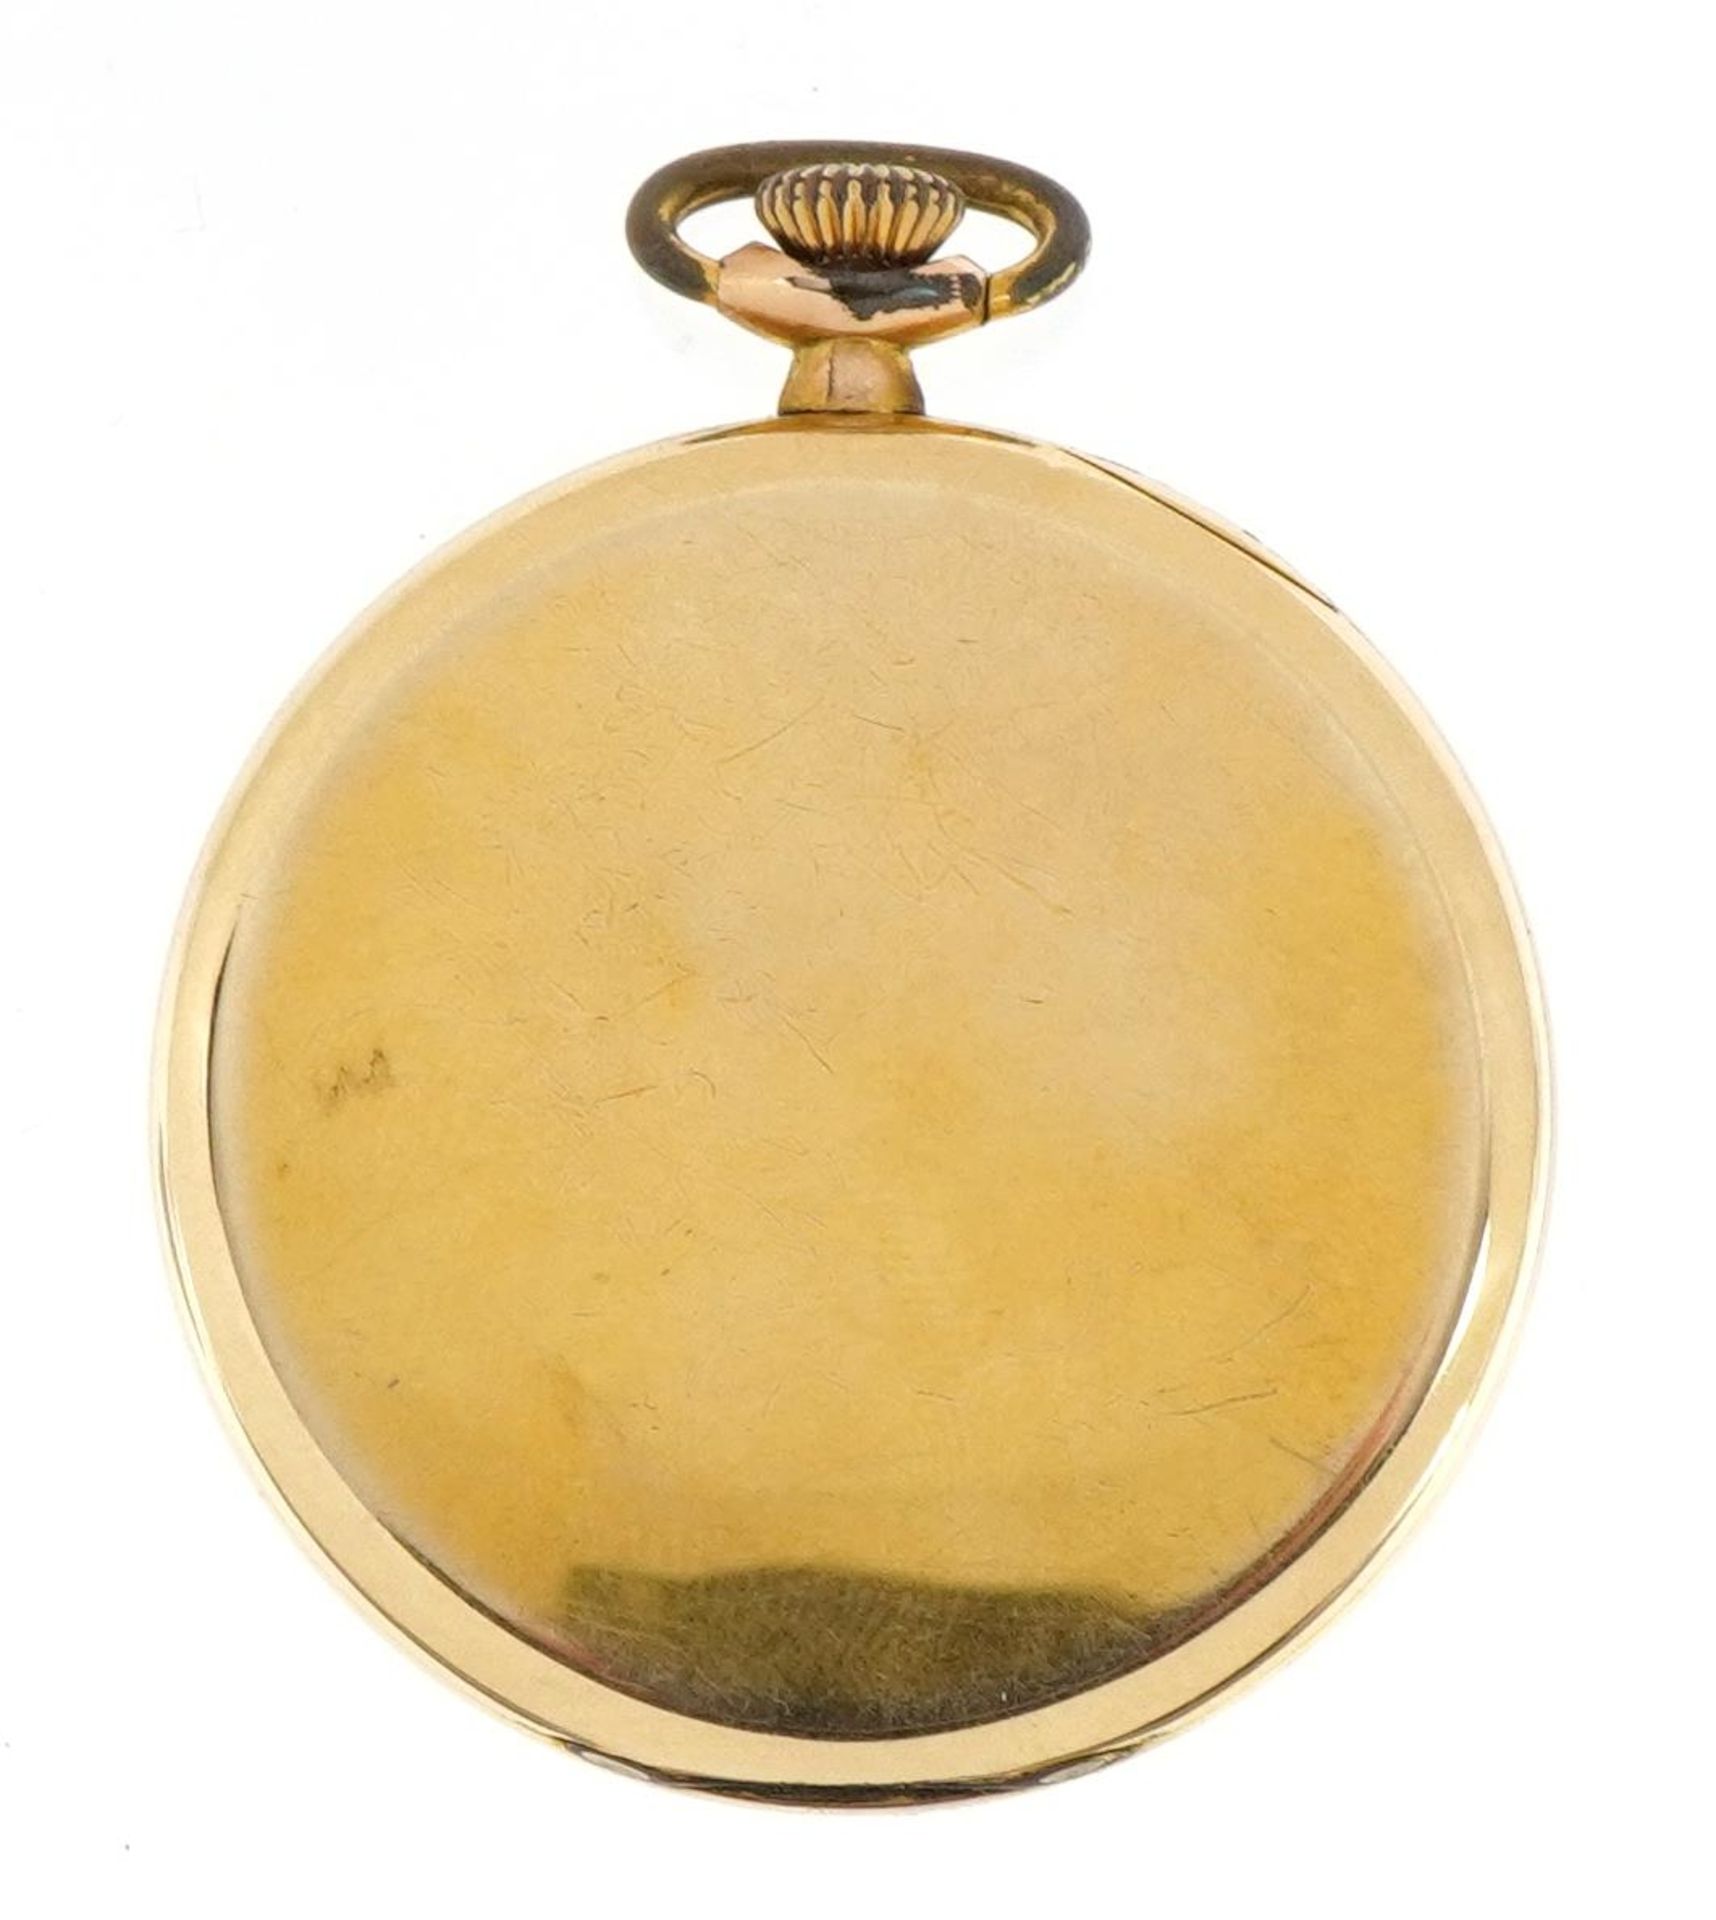 Rolex for C Bucherer, Lucerne, 14ct gold plated open face pocket watch with subsidiary dial, the - Image 3 of 5